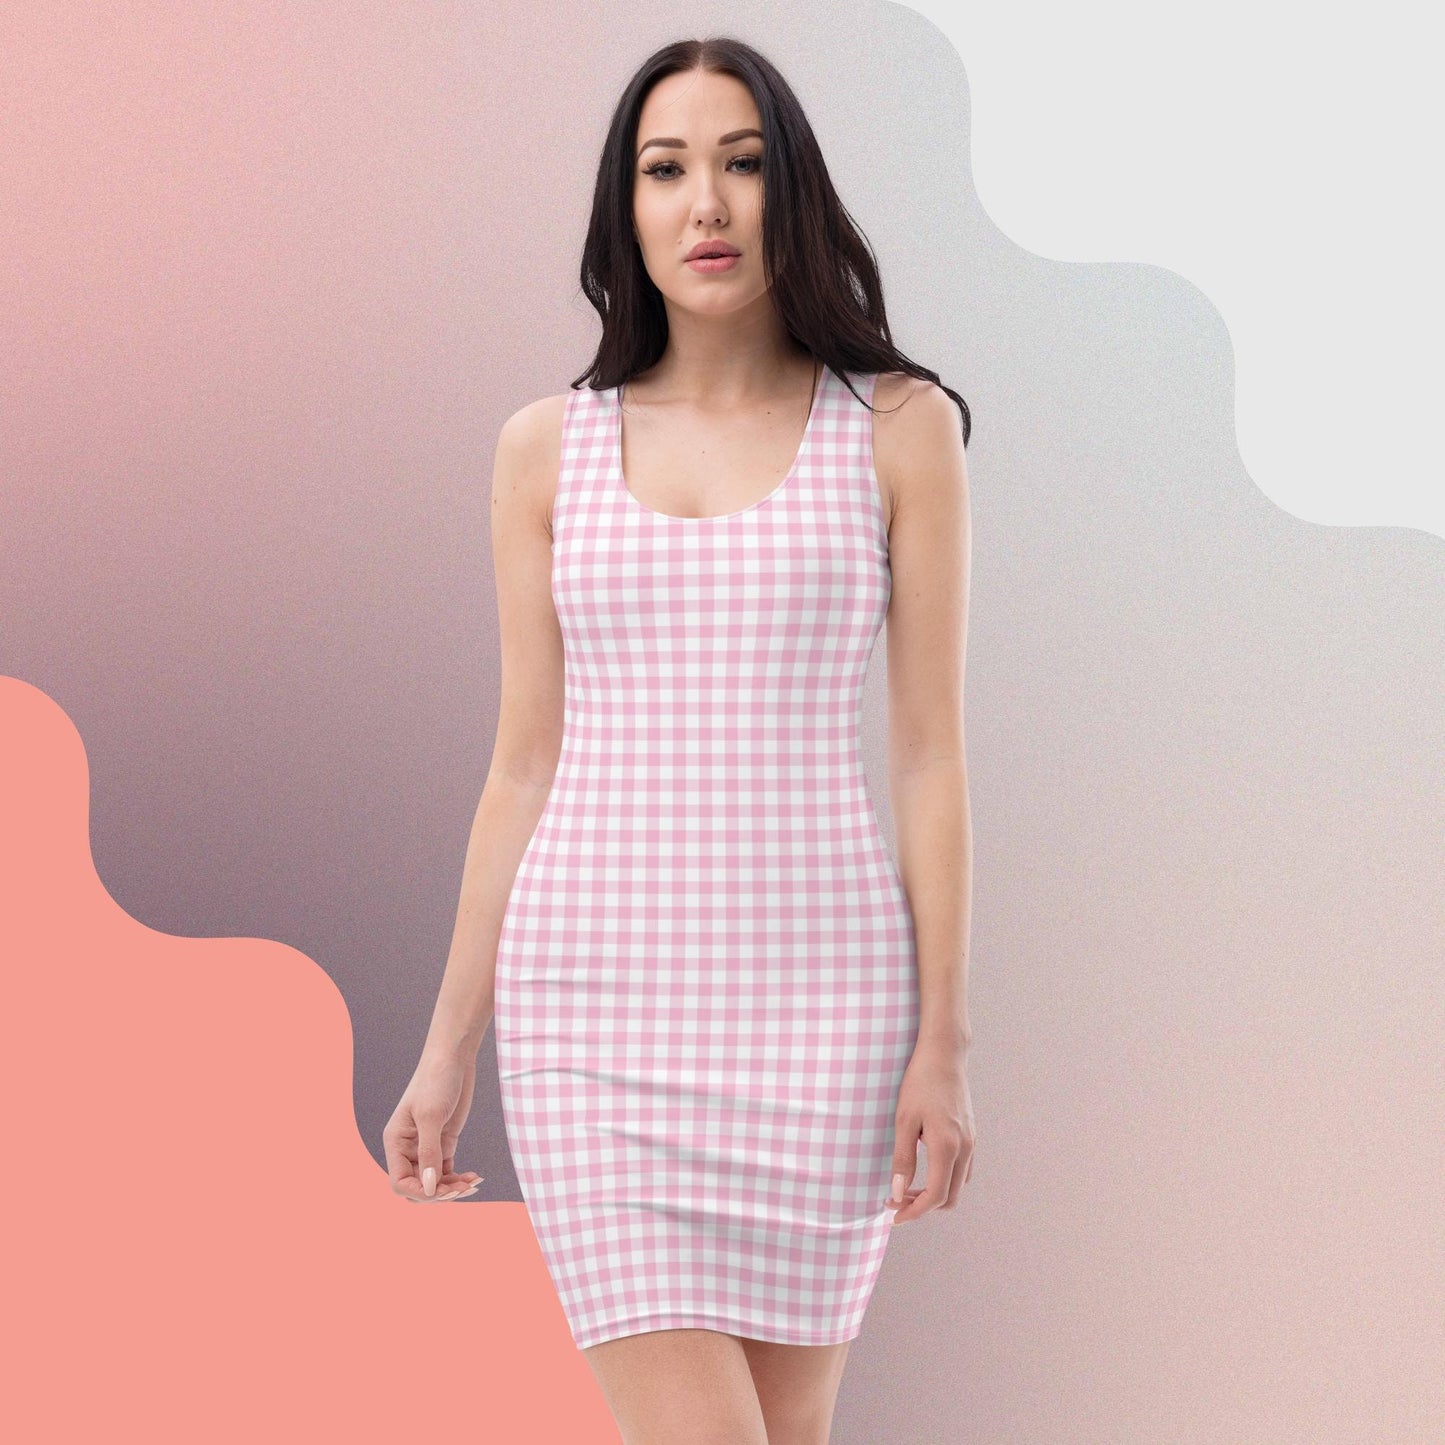 Pink Gingham Y2K 90s Retro Sheath Checker Tank Sleeveless Bodycon Halloween Let's Go Party NYE Costume Cruise Rose Gold Sexy Cocktail Dress